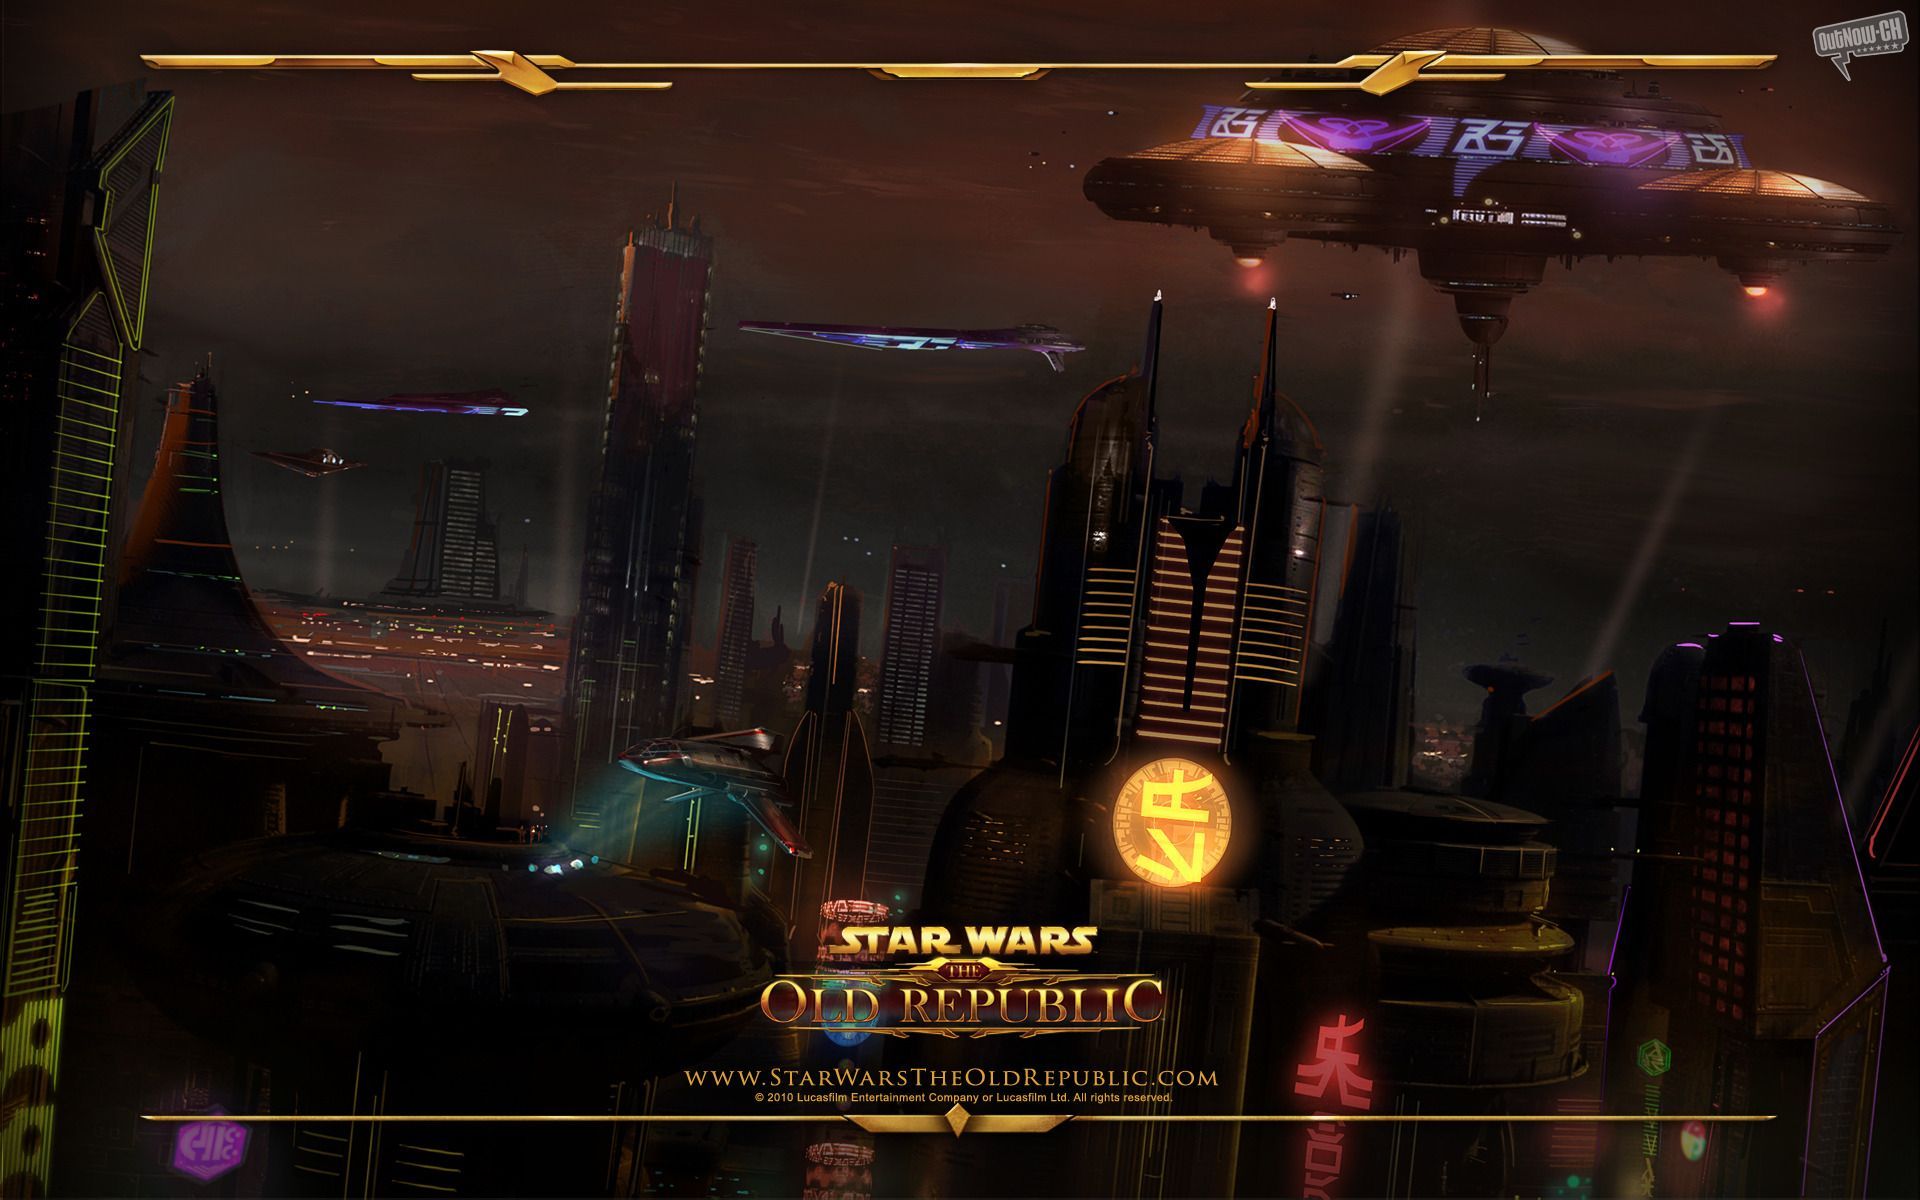 Star Wars: The Old Republic wallpapers | Star Wars: The Old ...